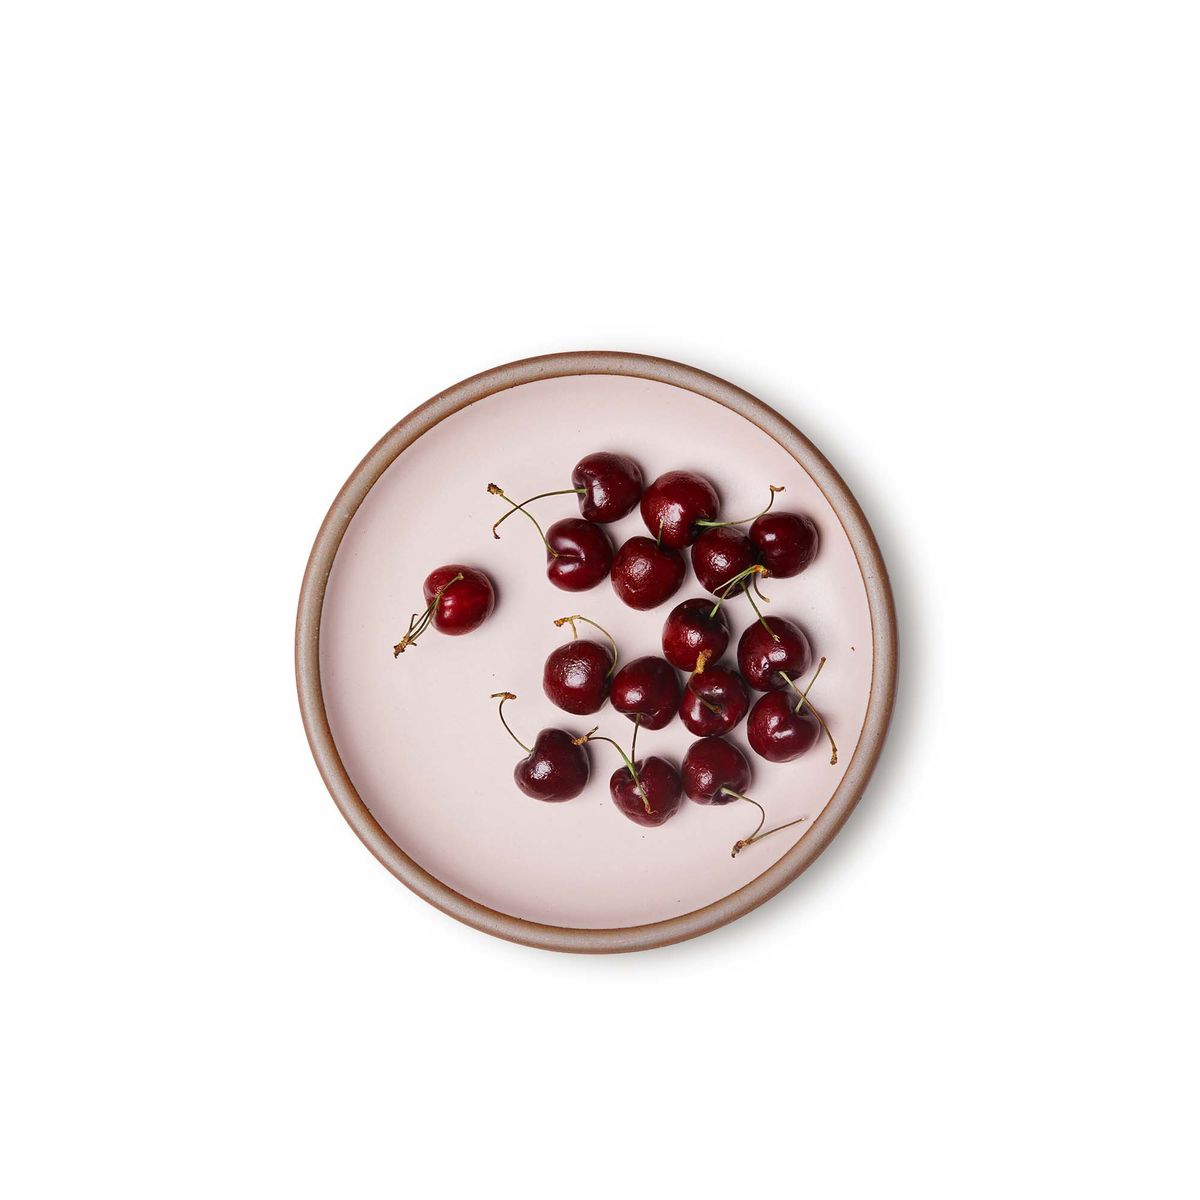 Cherries on a medium sized ceramic plate in a soft light pink color featuring iron speckles and an unglazed rim